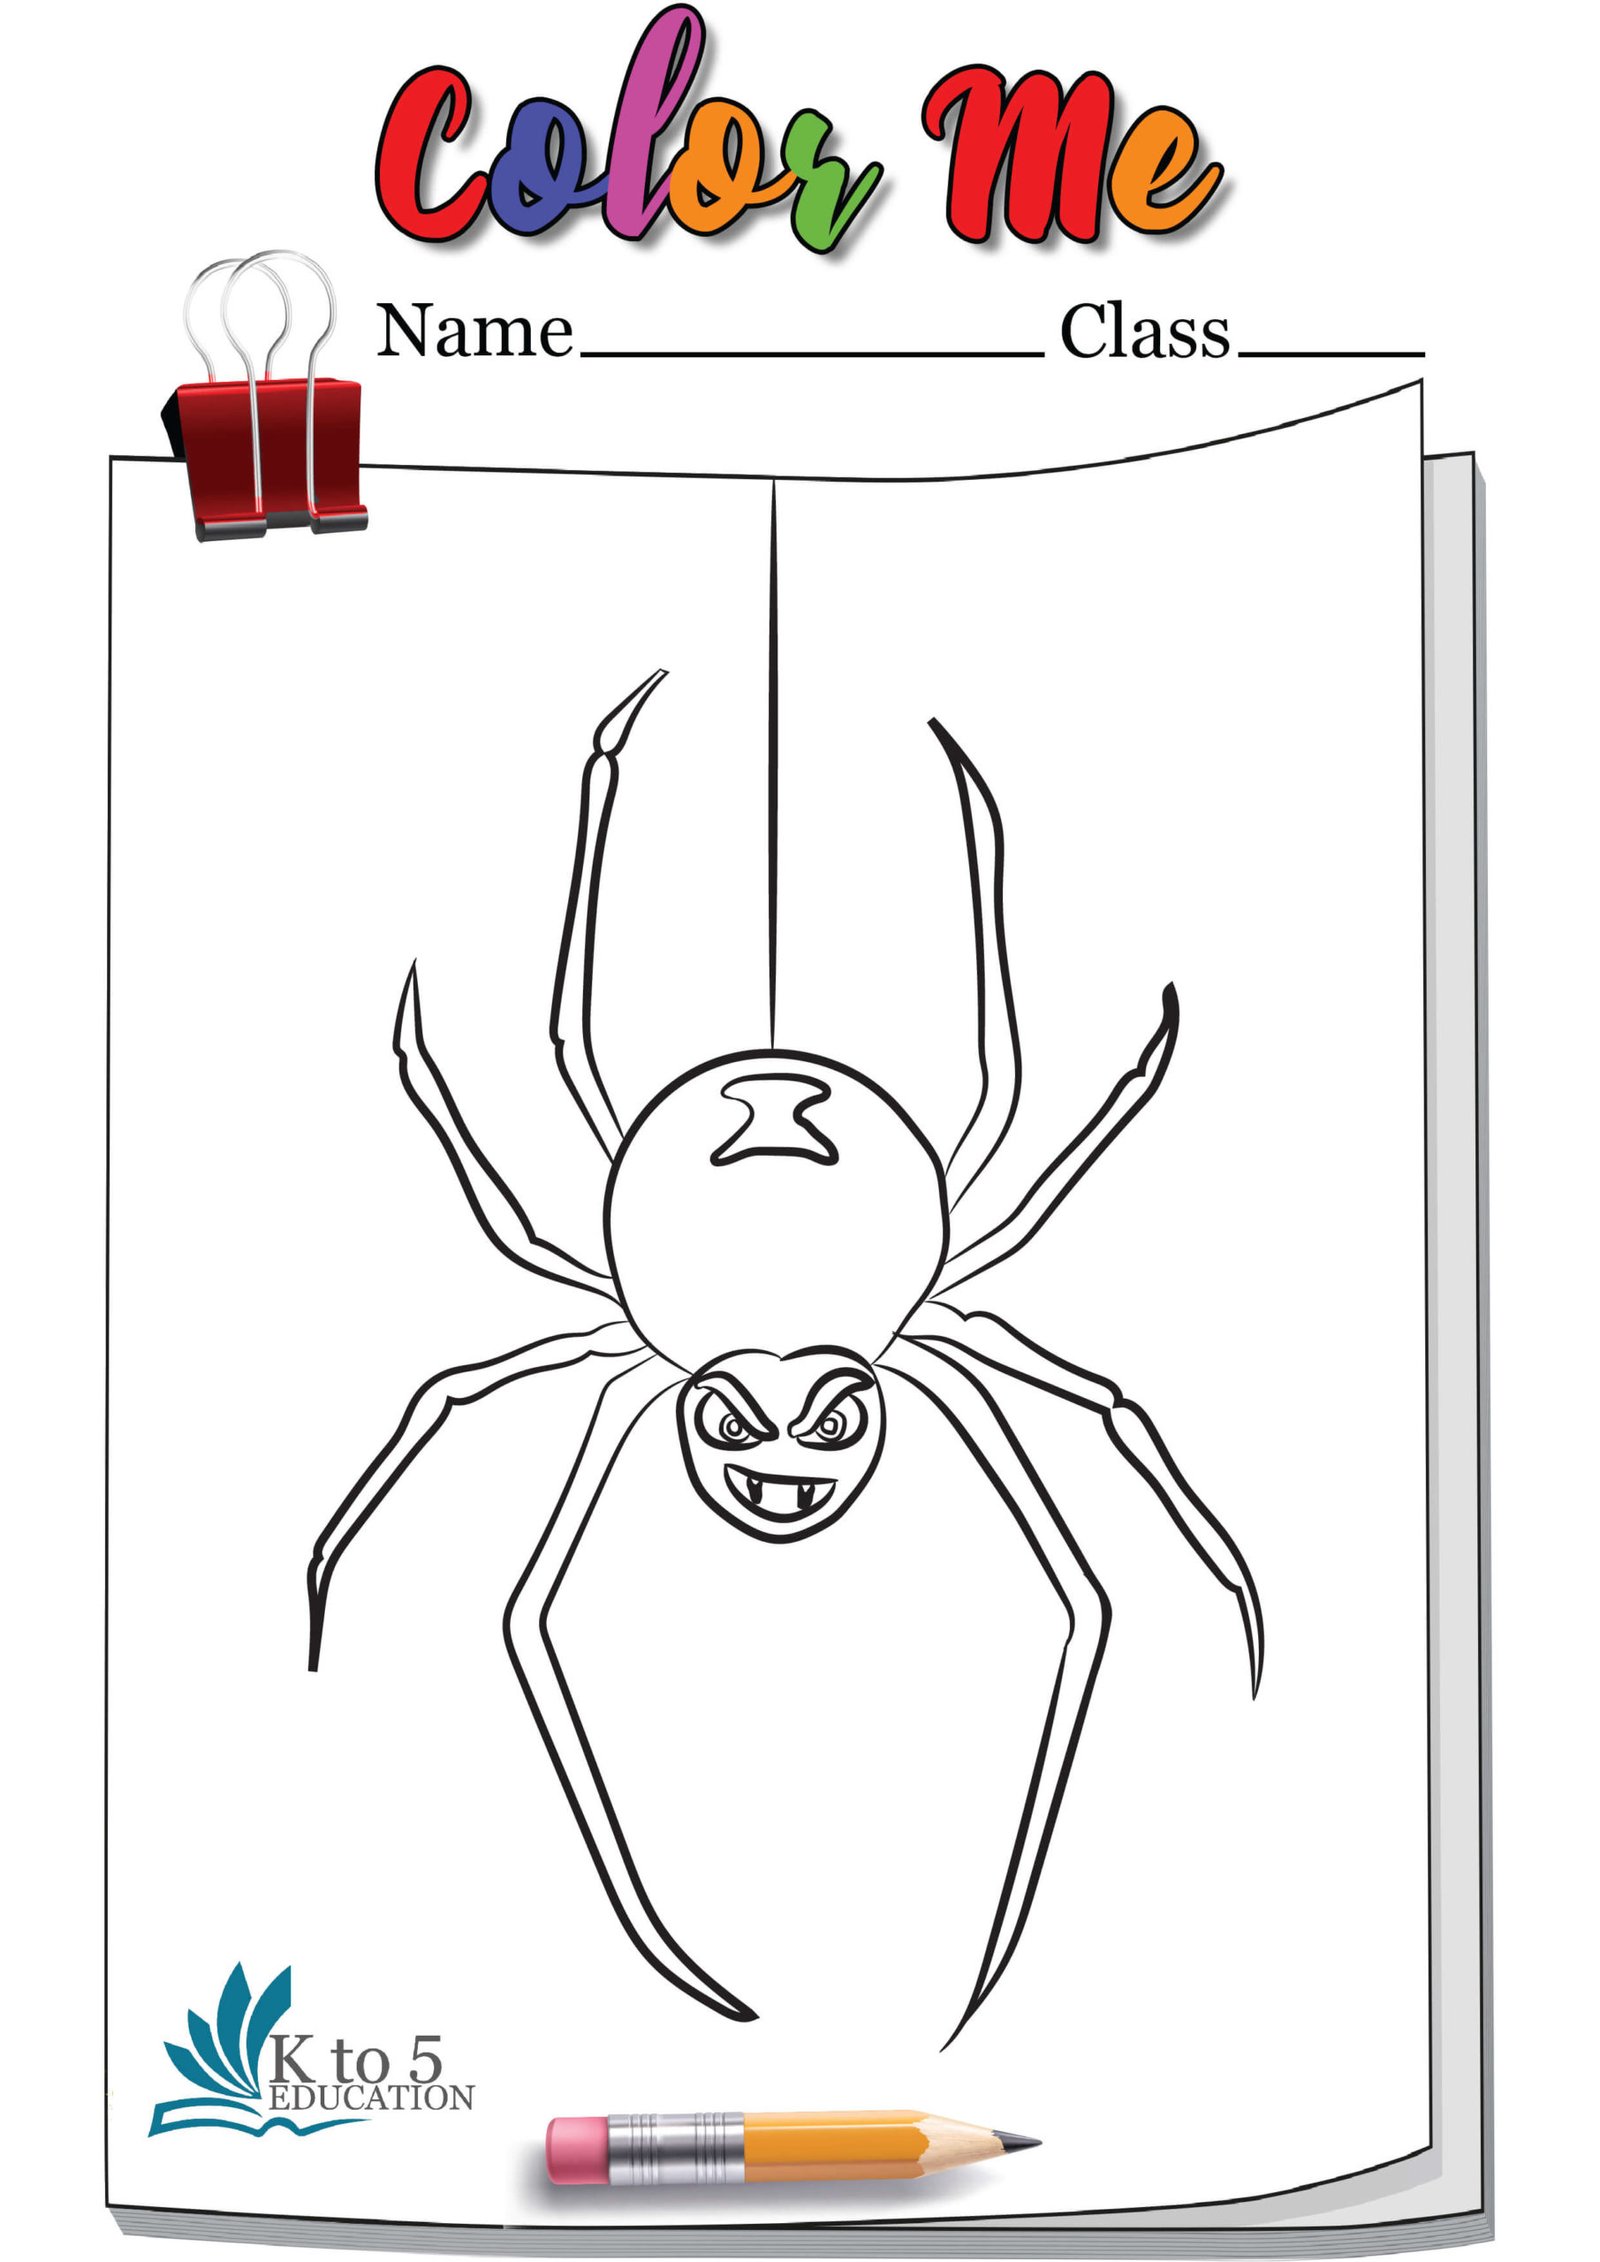 Scary Spider Hanging on web coloring page worksheet